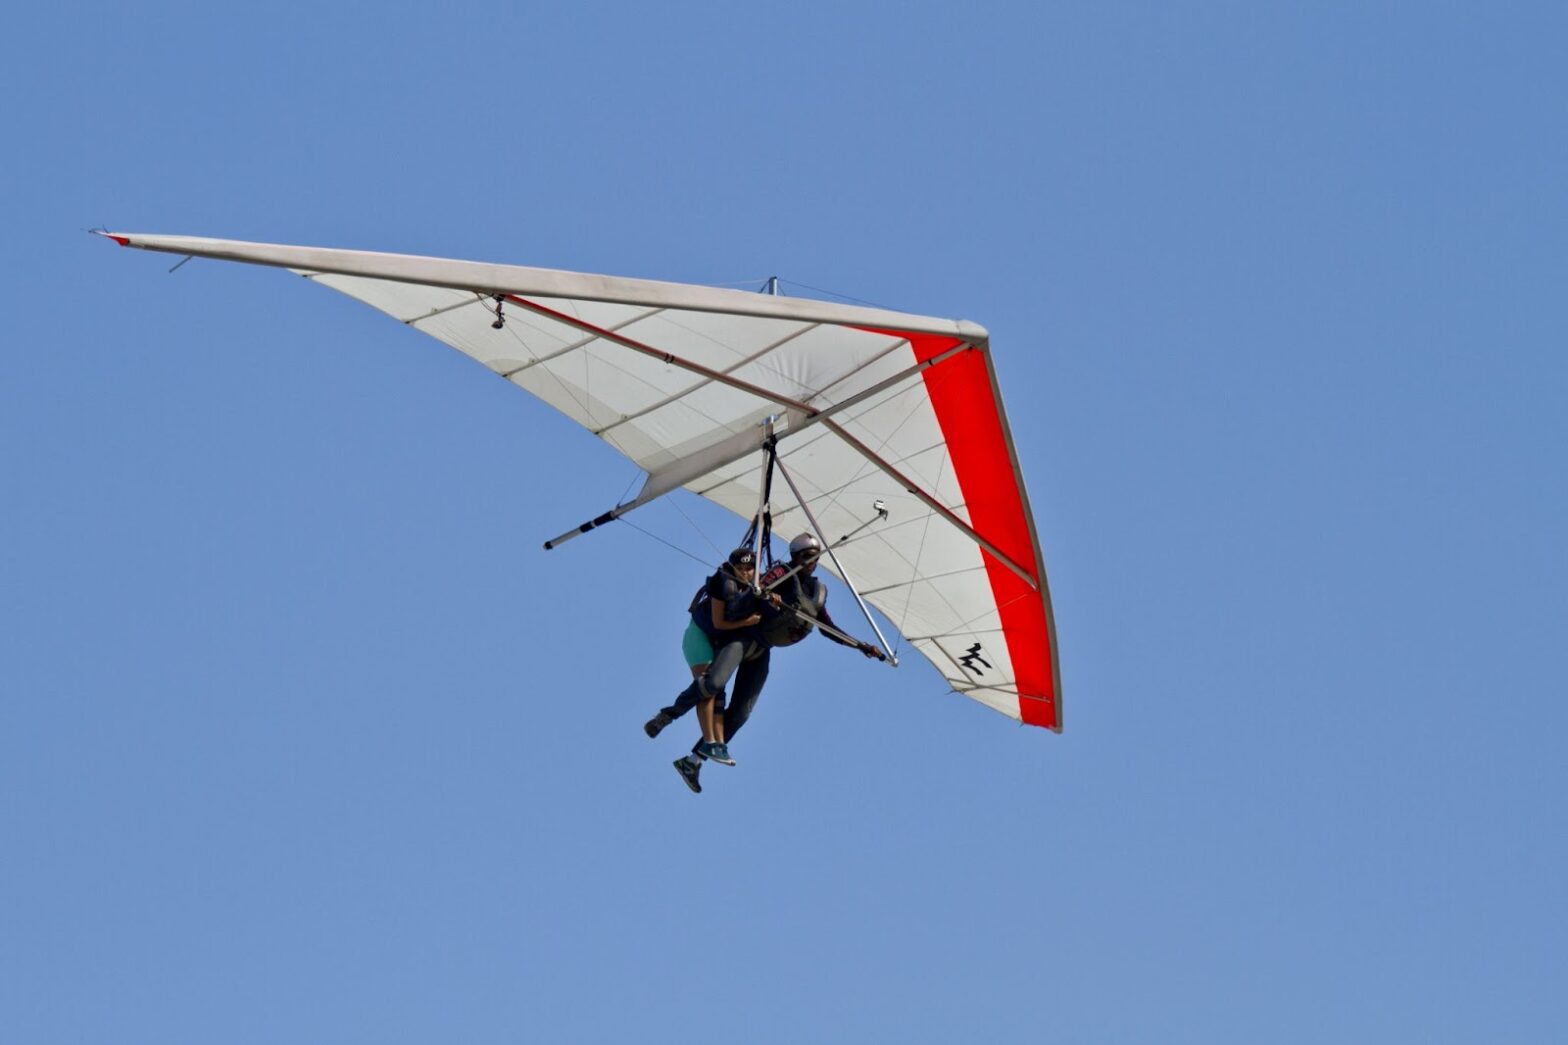 Human flying on a hang glider on a blue sky background